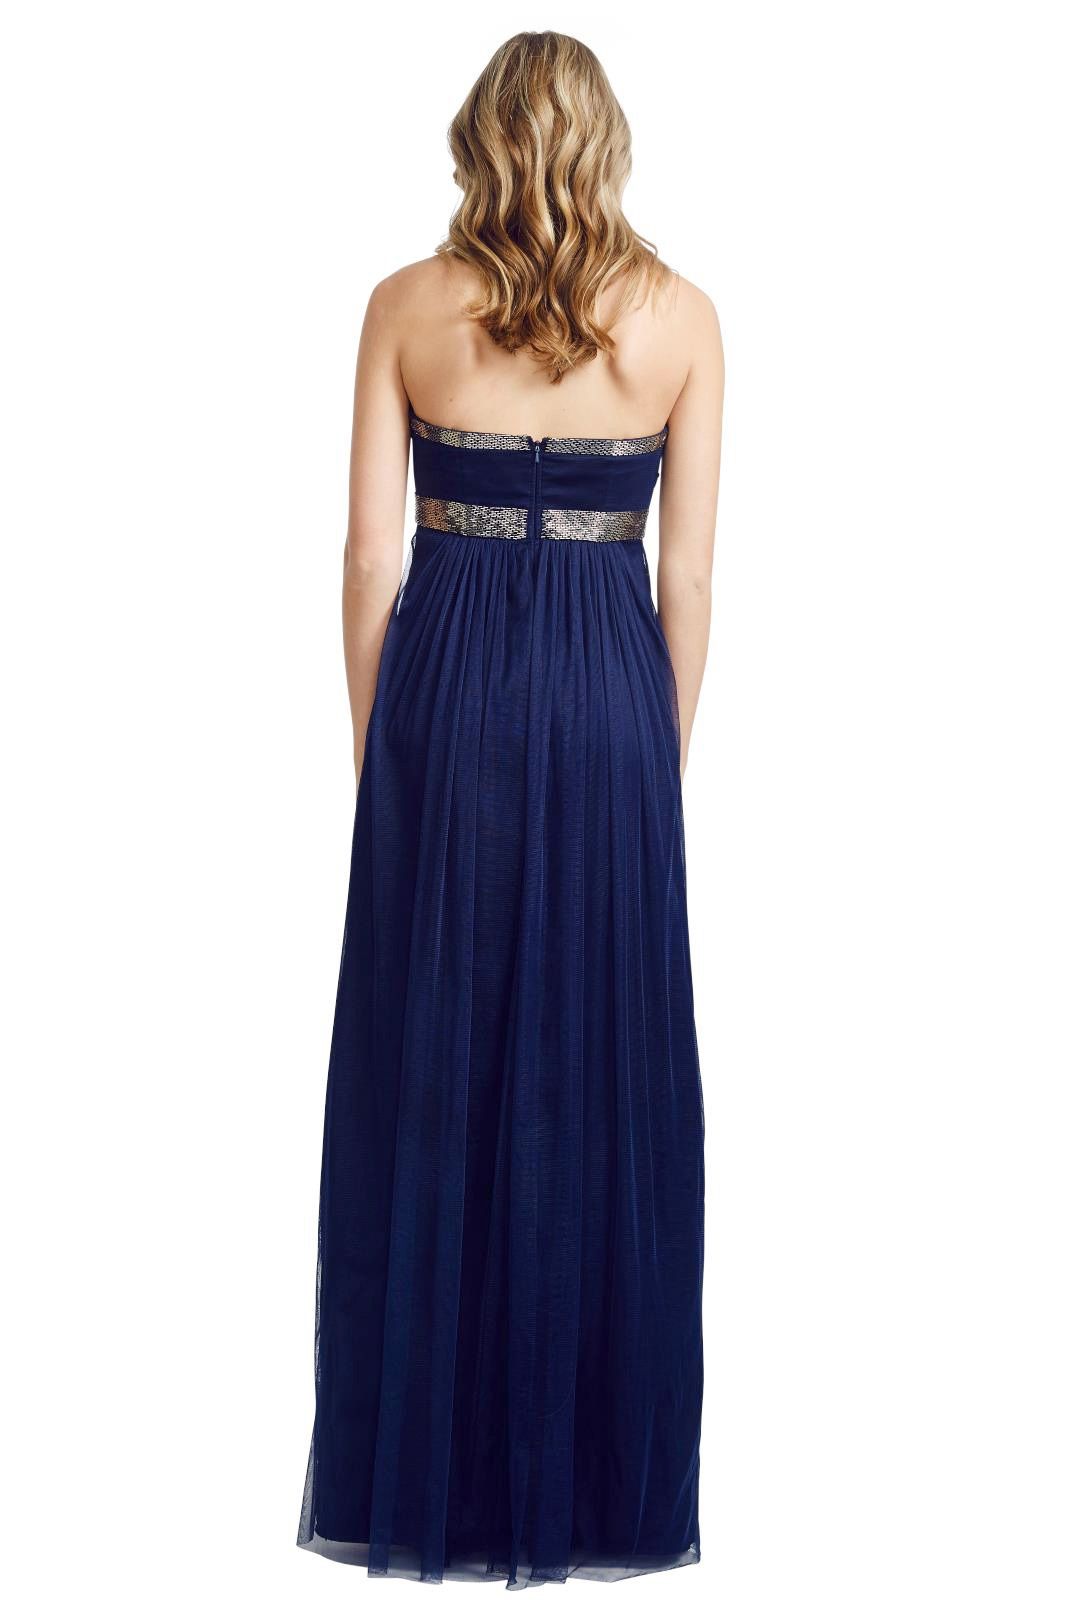 George - Hailey Gown - Blue - Back